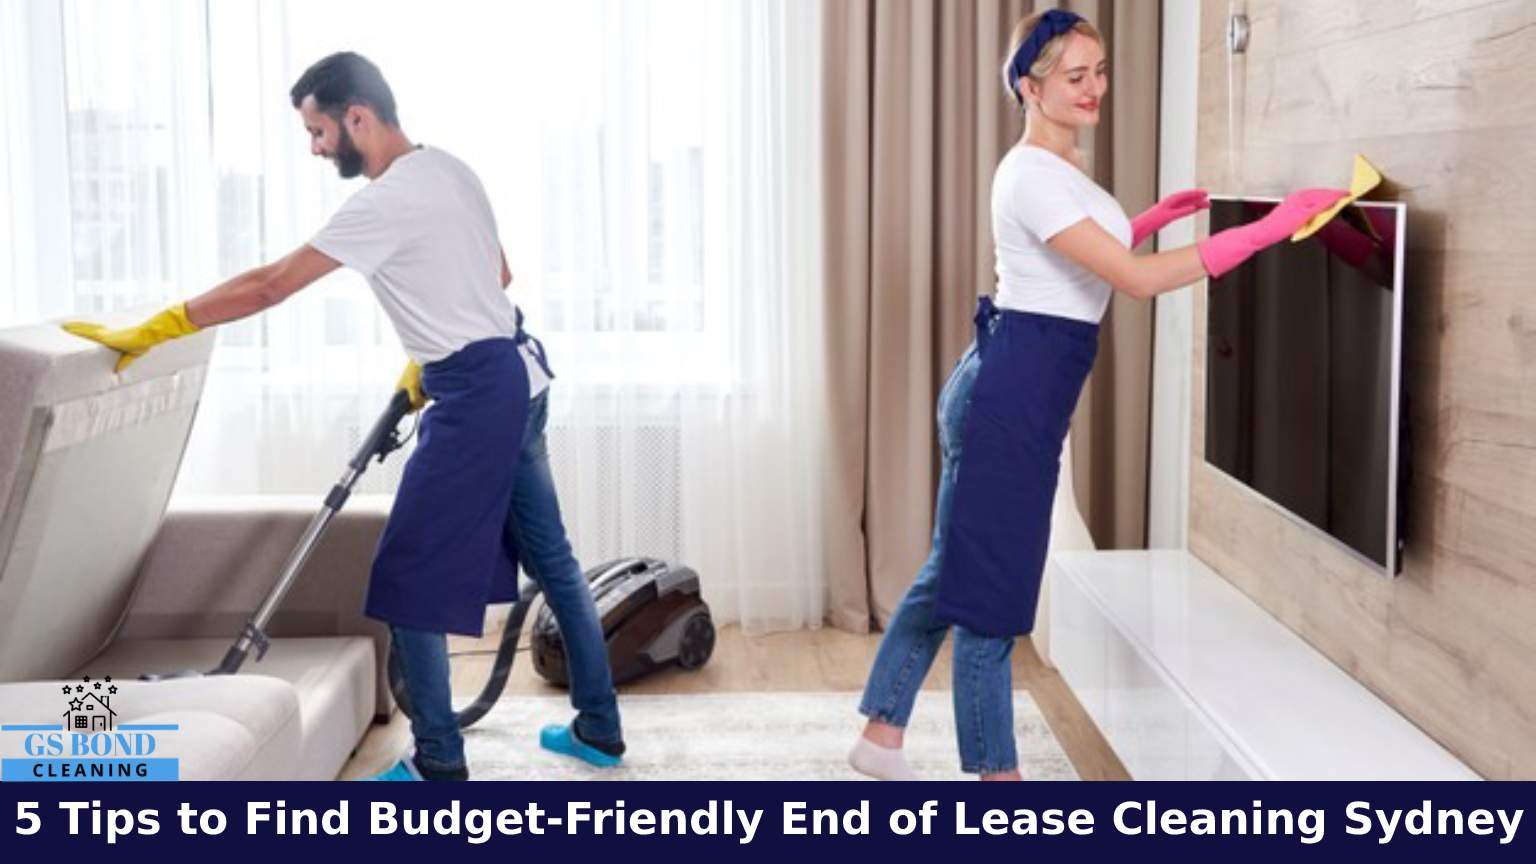 5 Tips to Find Budget-Friendly End of Lease Cleaning Sydney